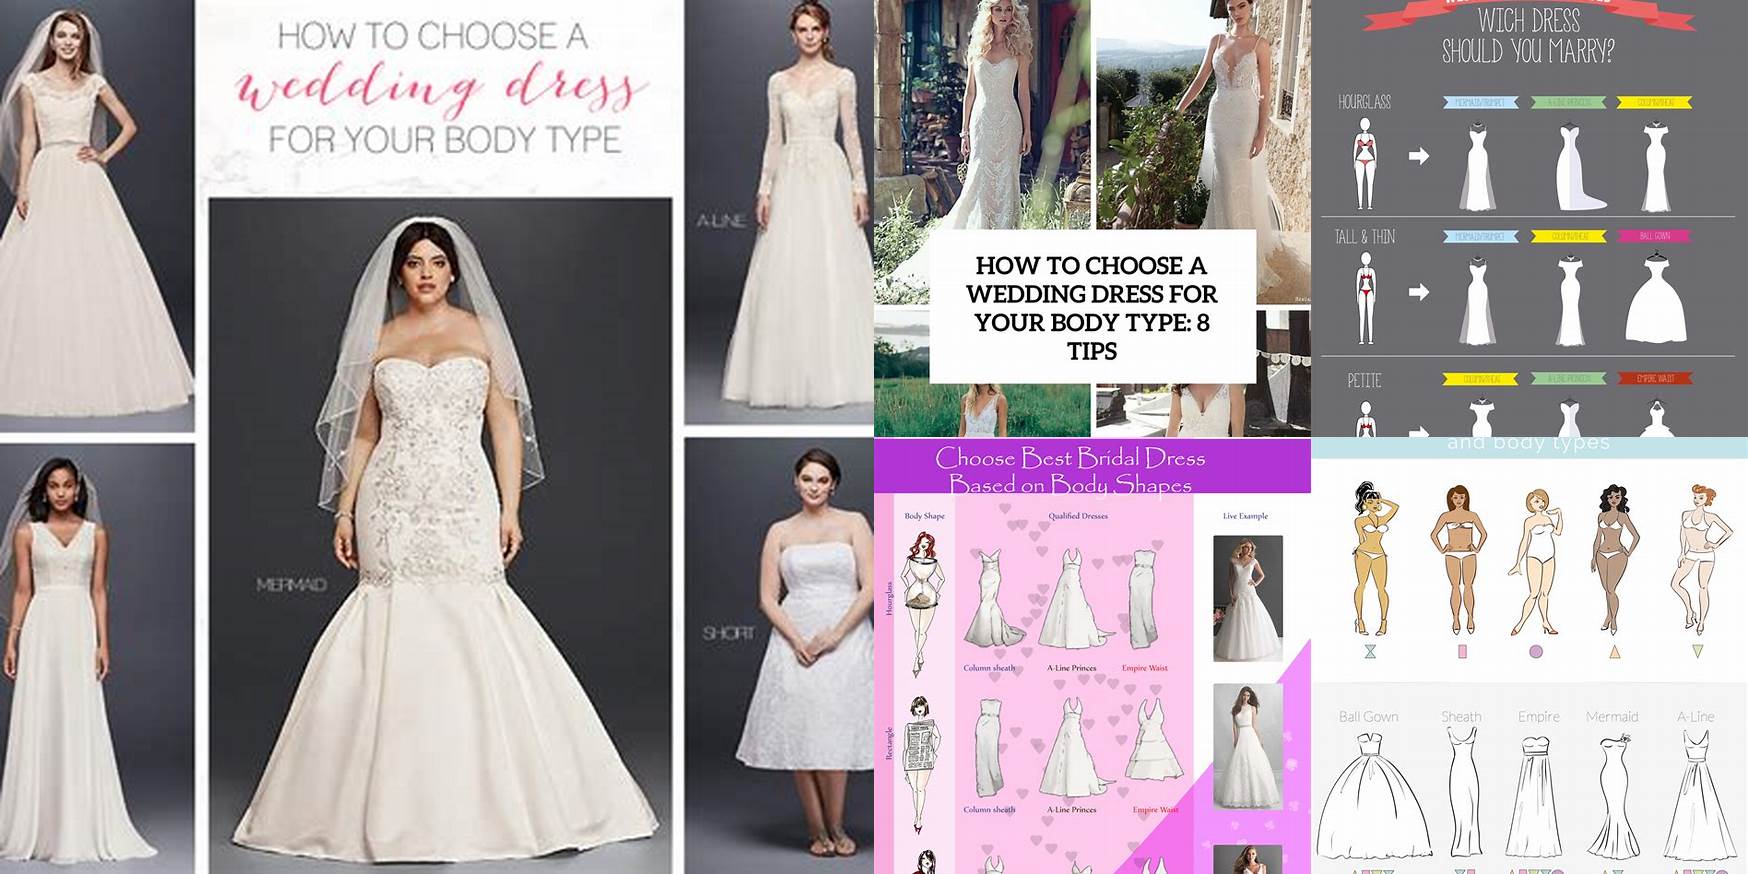 How To Choose Wedding Dress For Your Body Type